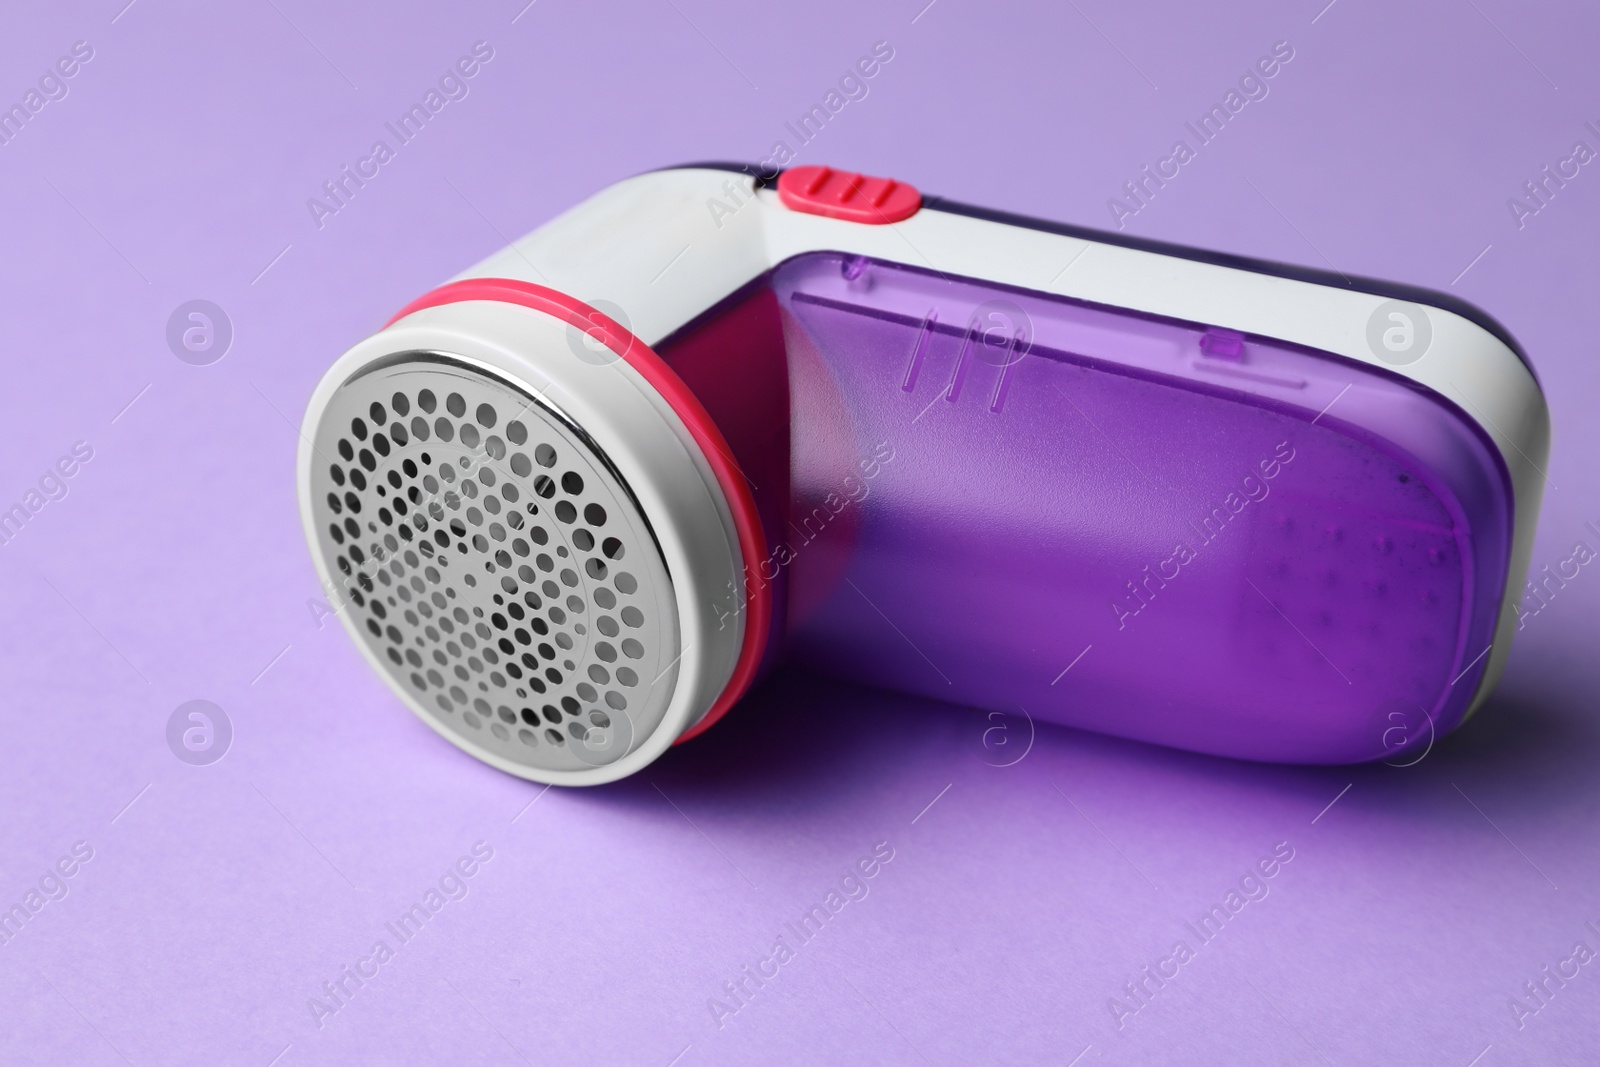 Photo of Modern fabric shaver for lint removing on purple background